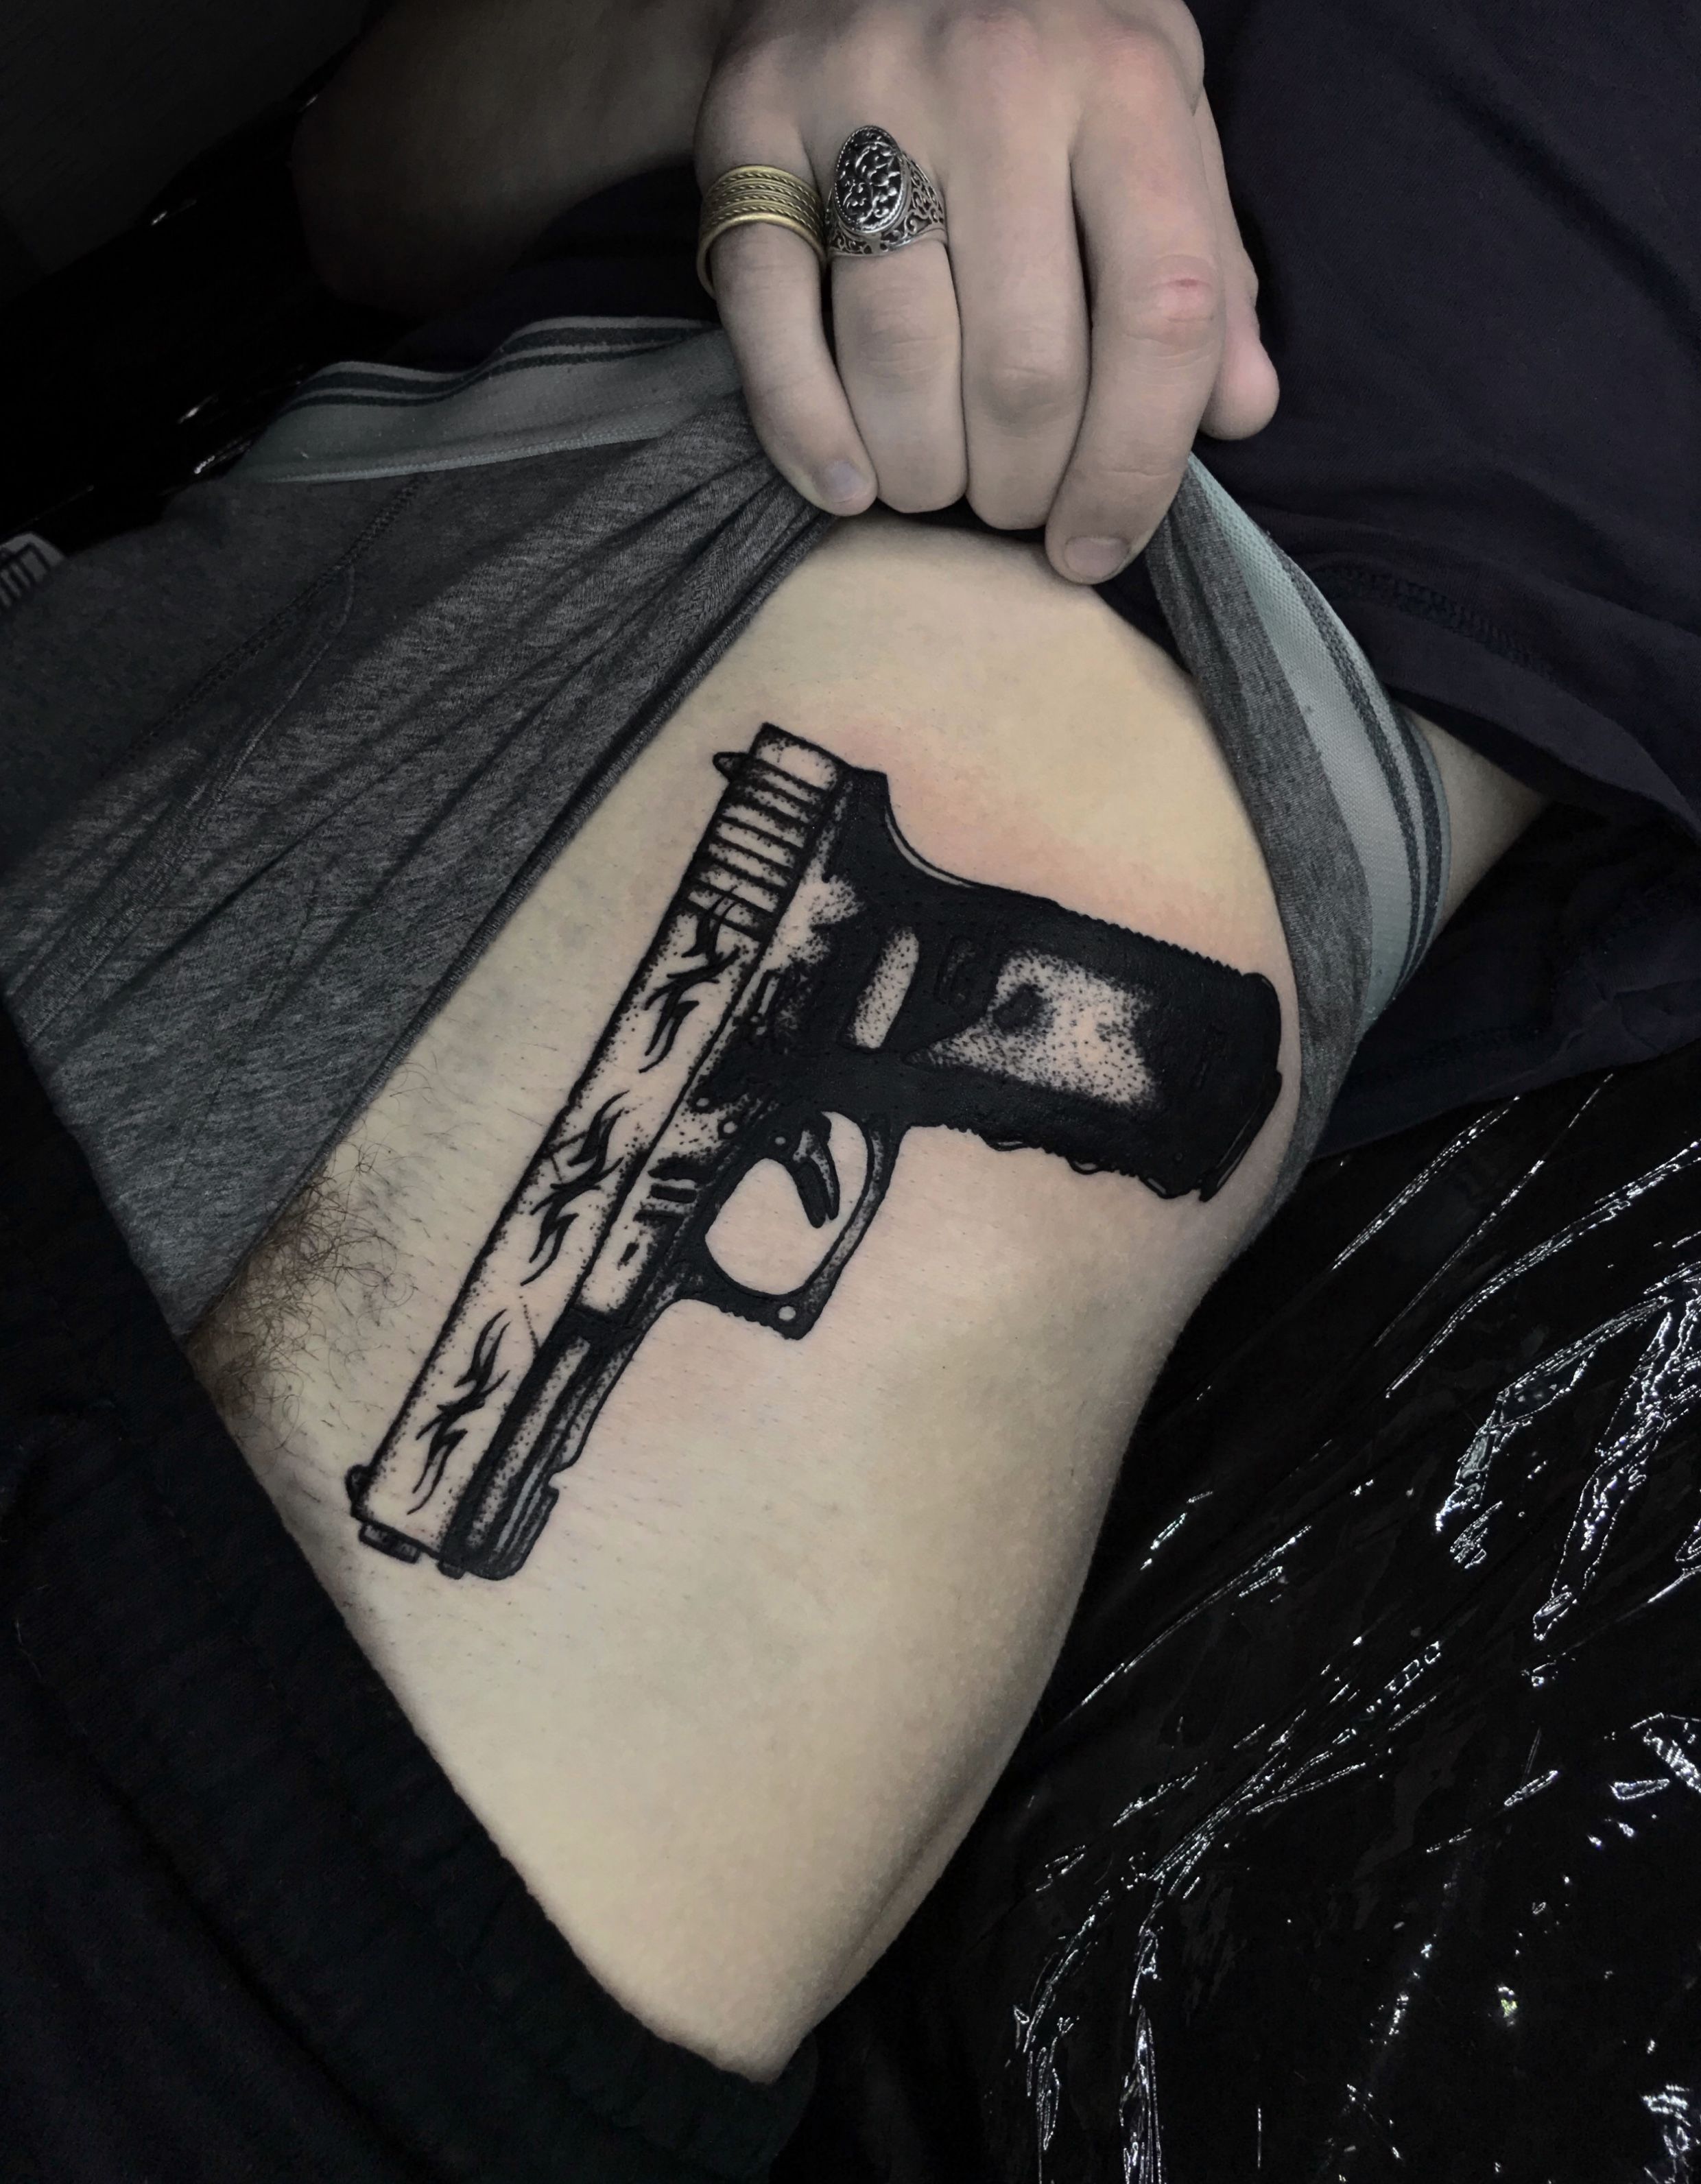 Black and gray glock tattoo. Thanks for looking and Enjoy the work! #art  #artcollective #blackandgraytattoo #colortattoo #tattoosleeve #i... |  Instagram